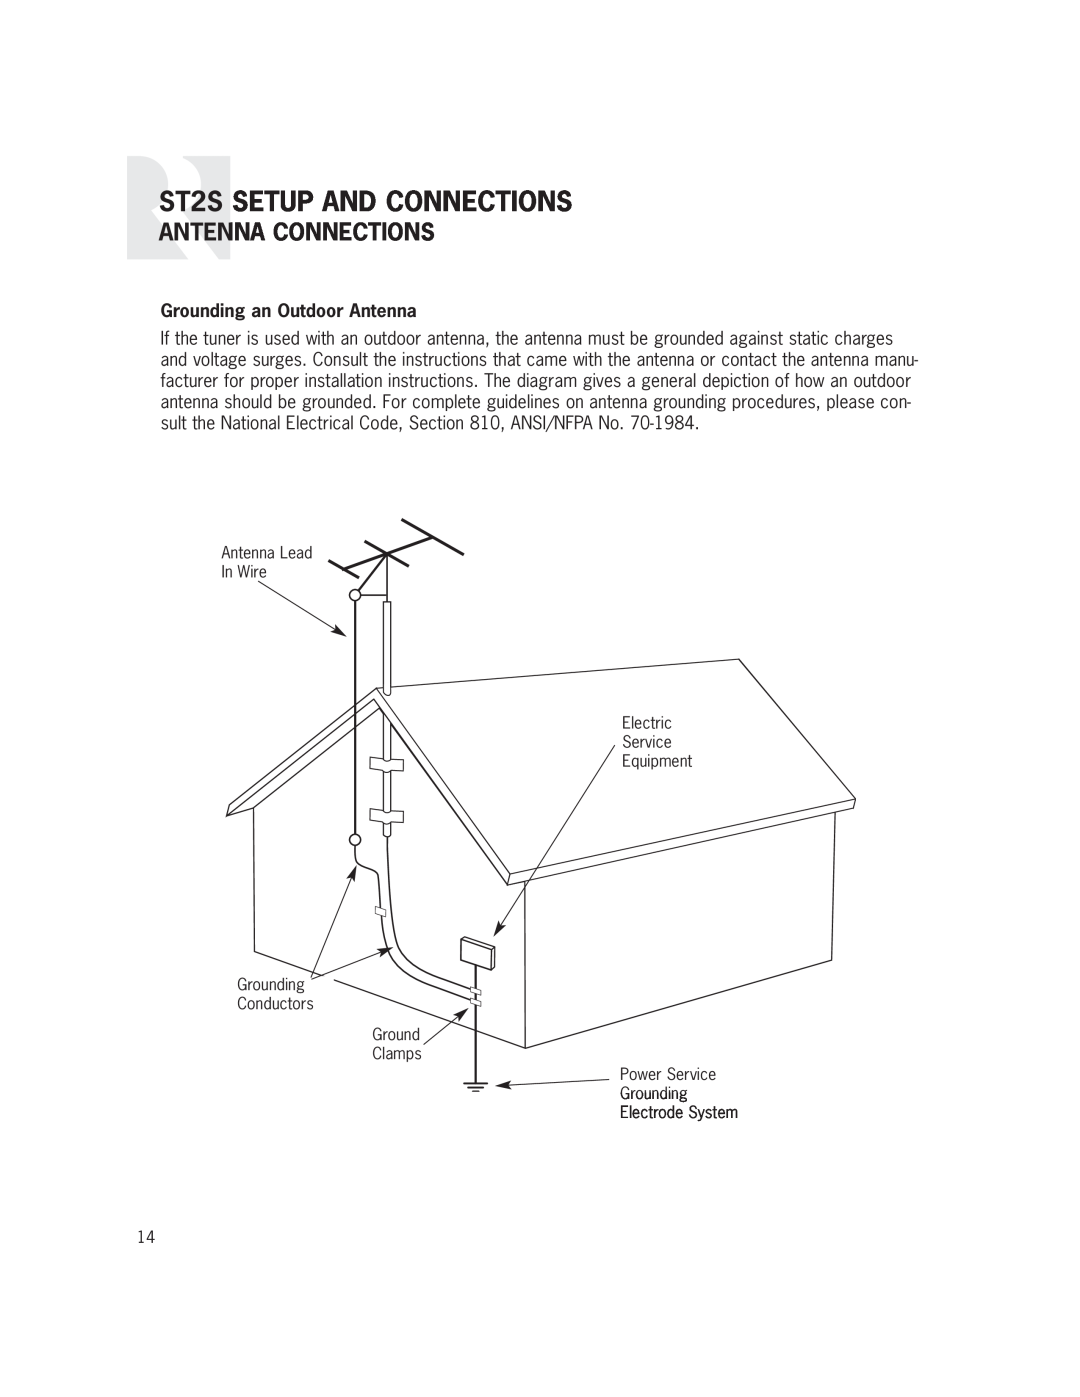 Russound installation manual ST2S SETUP AND CONNECTIONS, Antenna Connections, Grounding an Outdoor Antenna, Clamps 